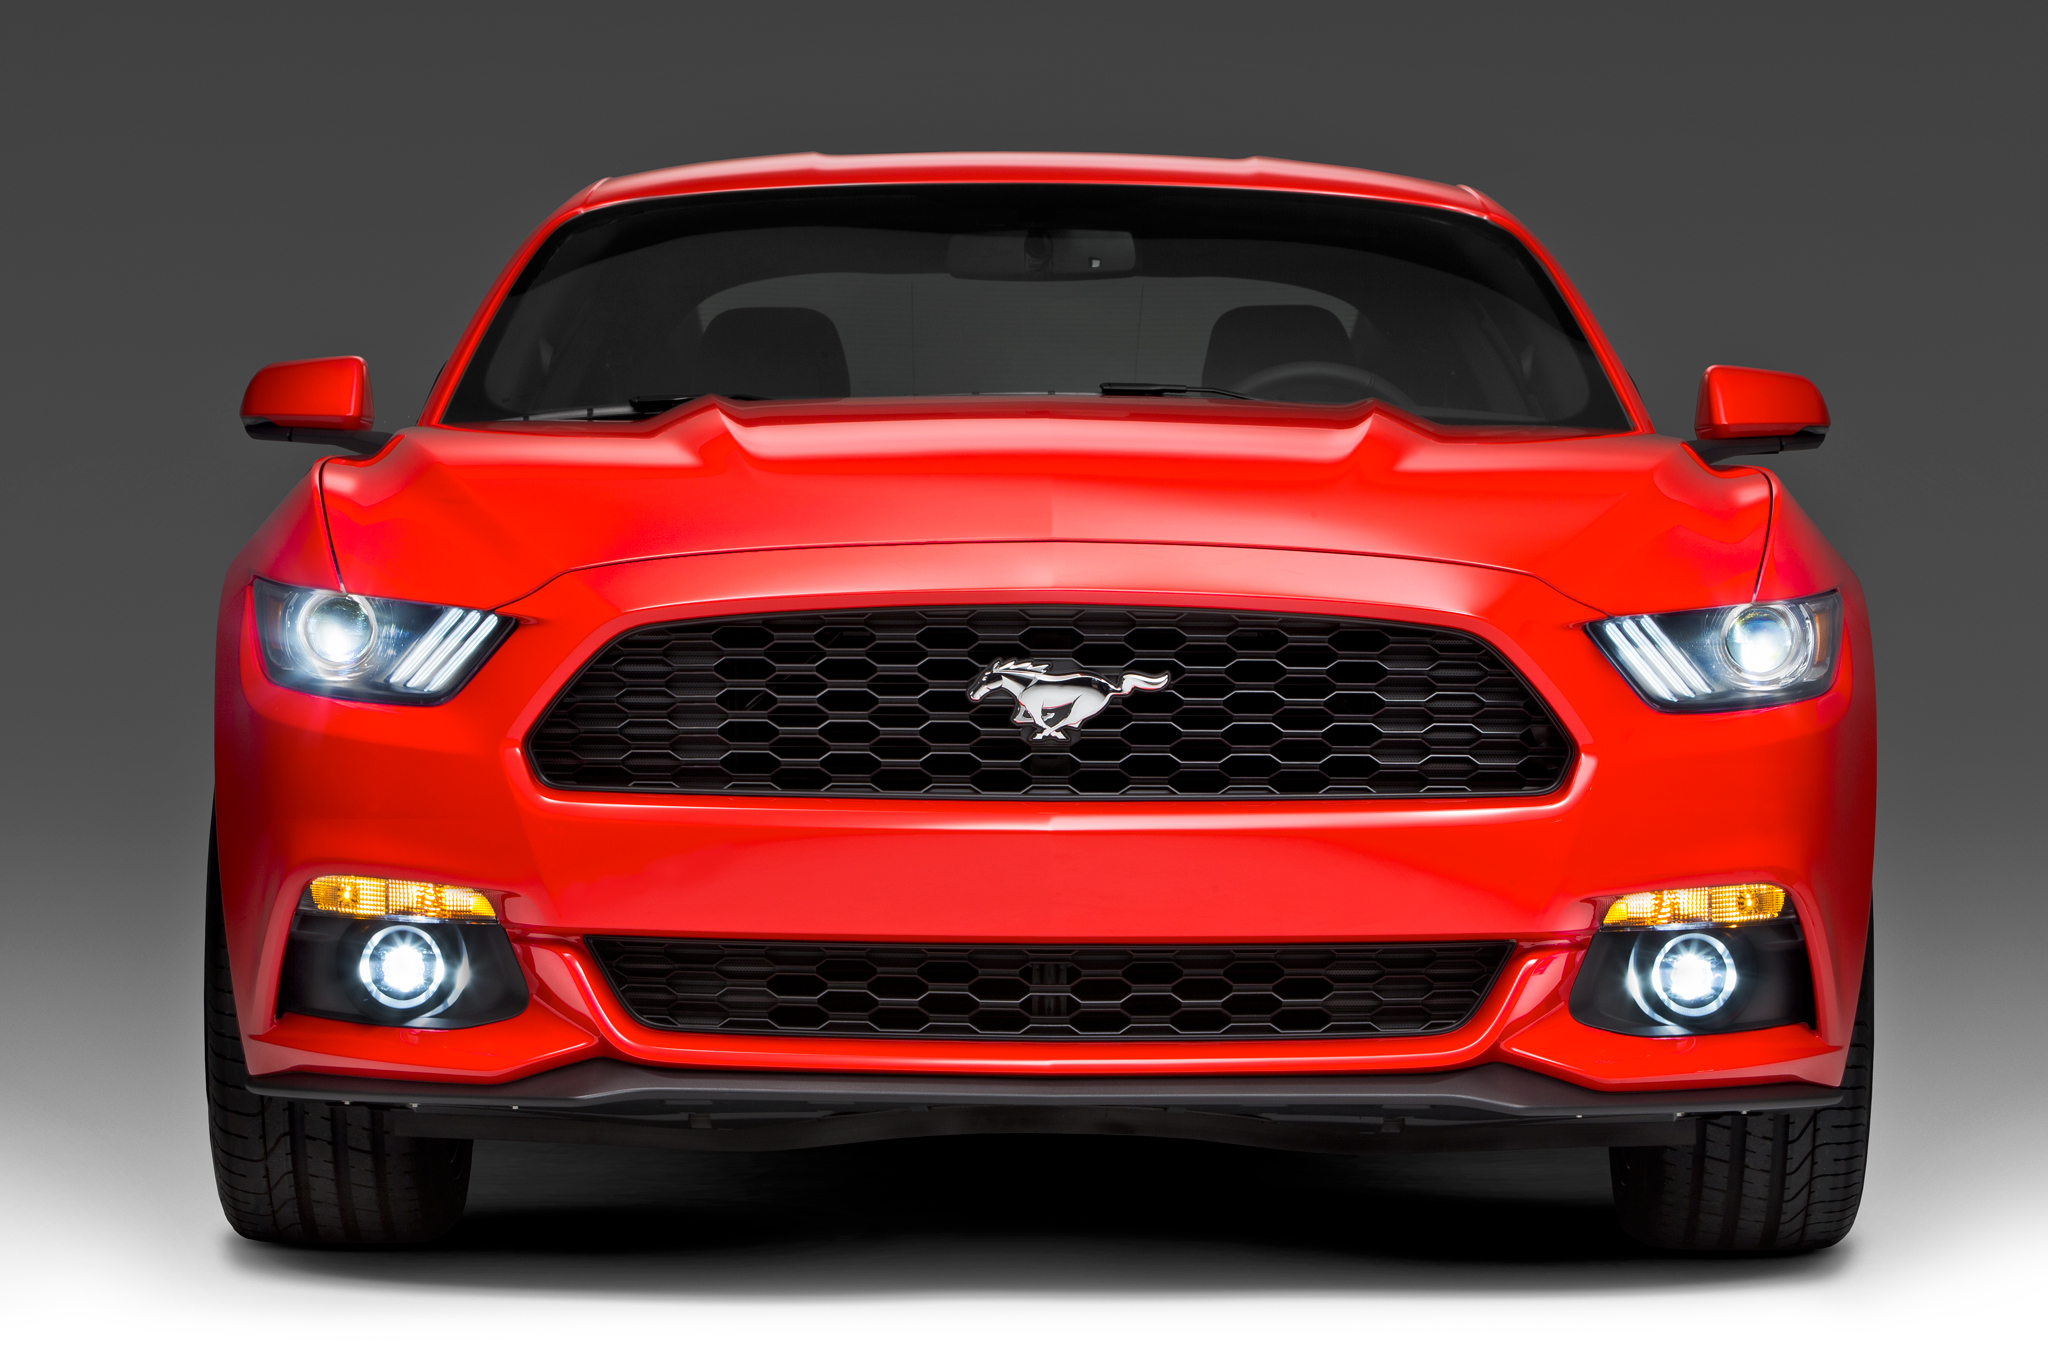 2015 Ford Mustang Backgrounds on Wallpapers Vista